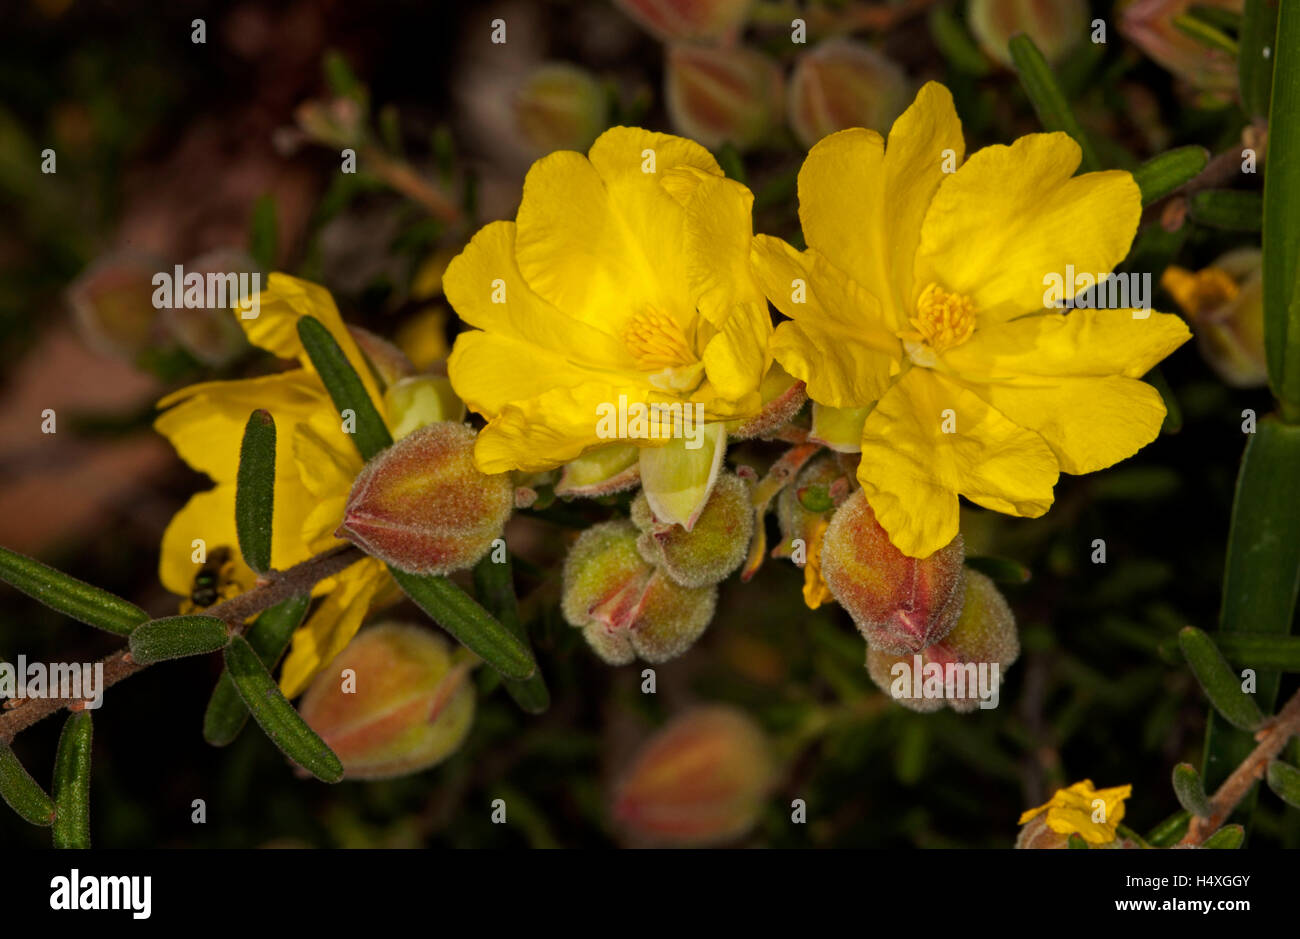 Cluster of vivid yellow flowers, red tinged buds & green leaves of Australian wildflower Hibbertia linearis on dark background Stock Photo